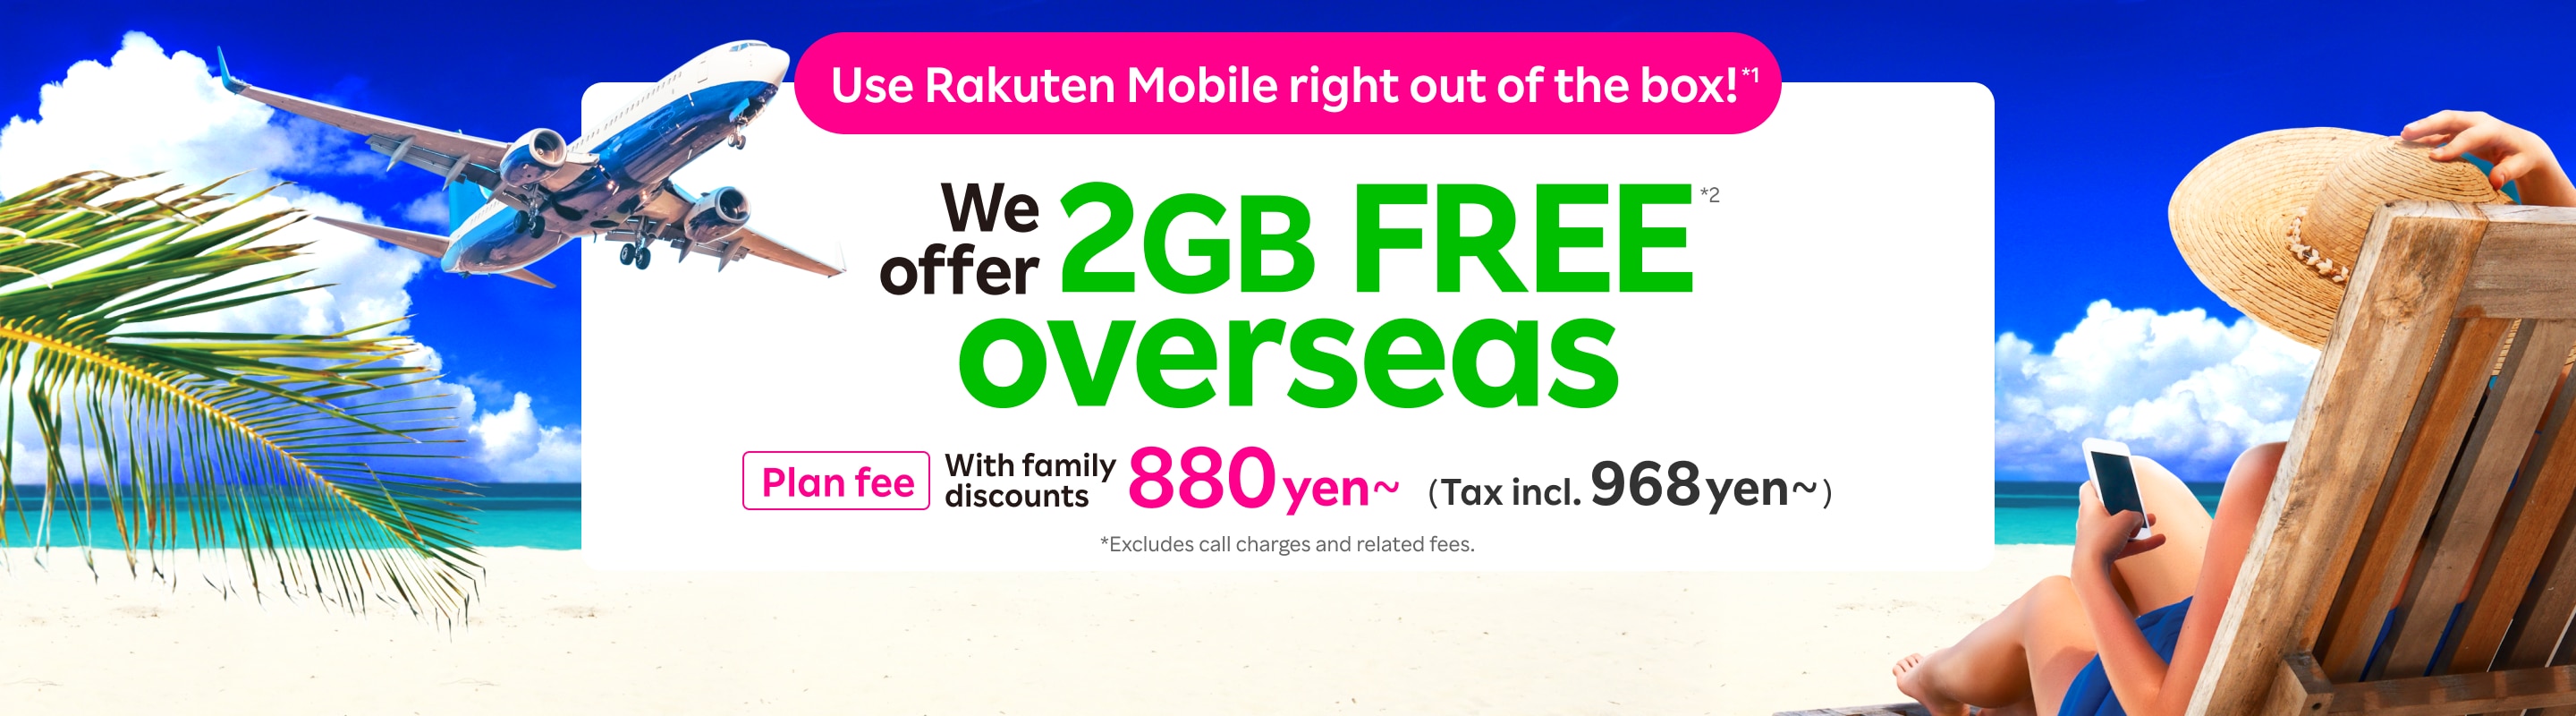 Use Rakuten Mobile right out of the box!*1 We offers 2GB FREE overseas*2 [Plan fee]880yen~ (Tax incl. 968yen~)